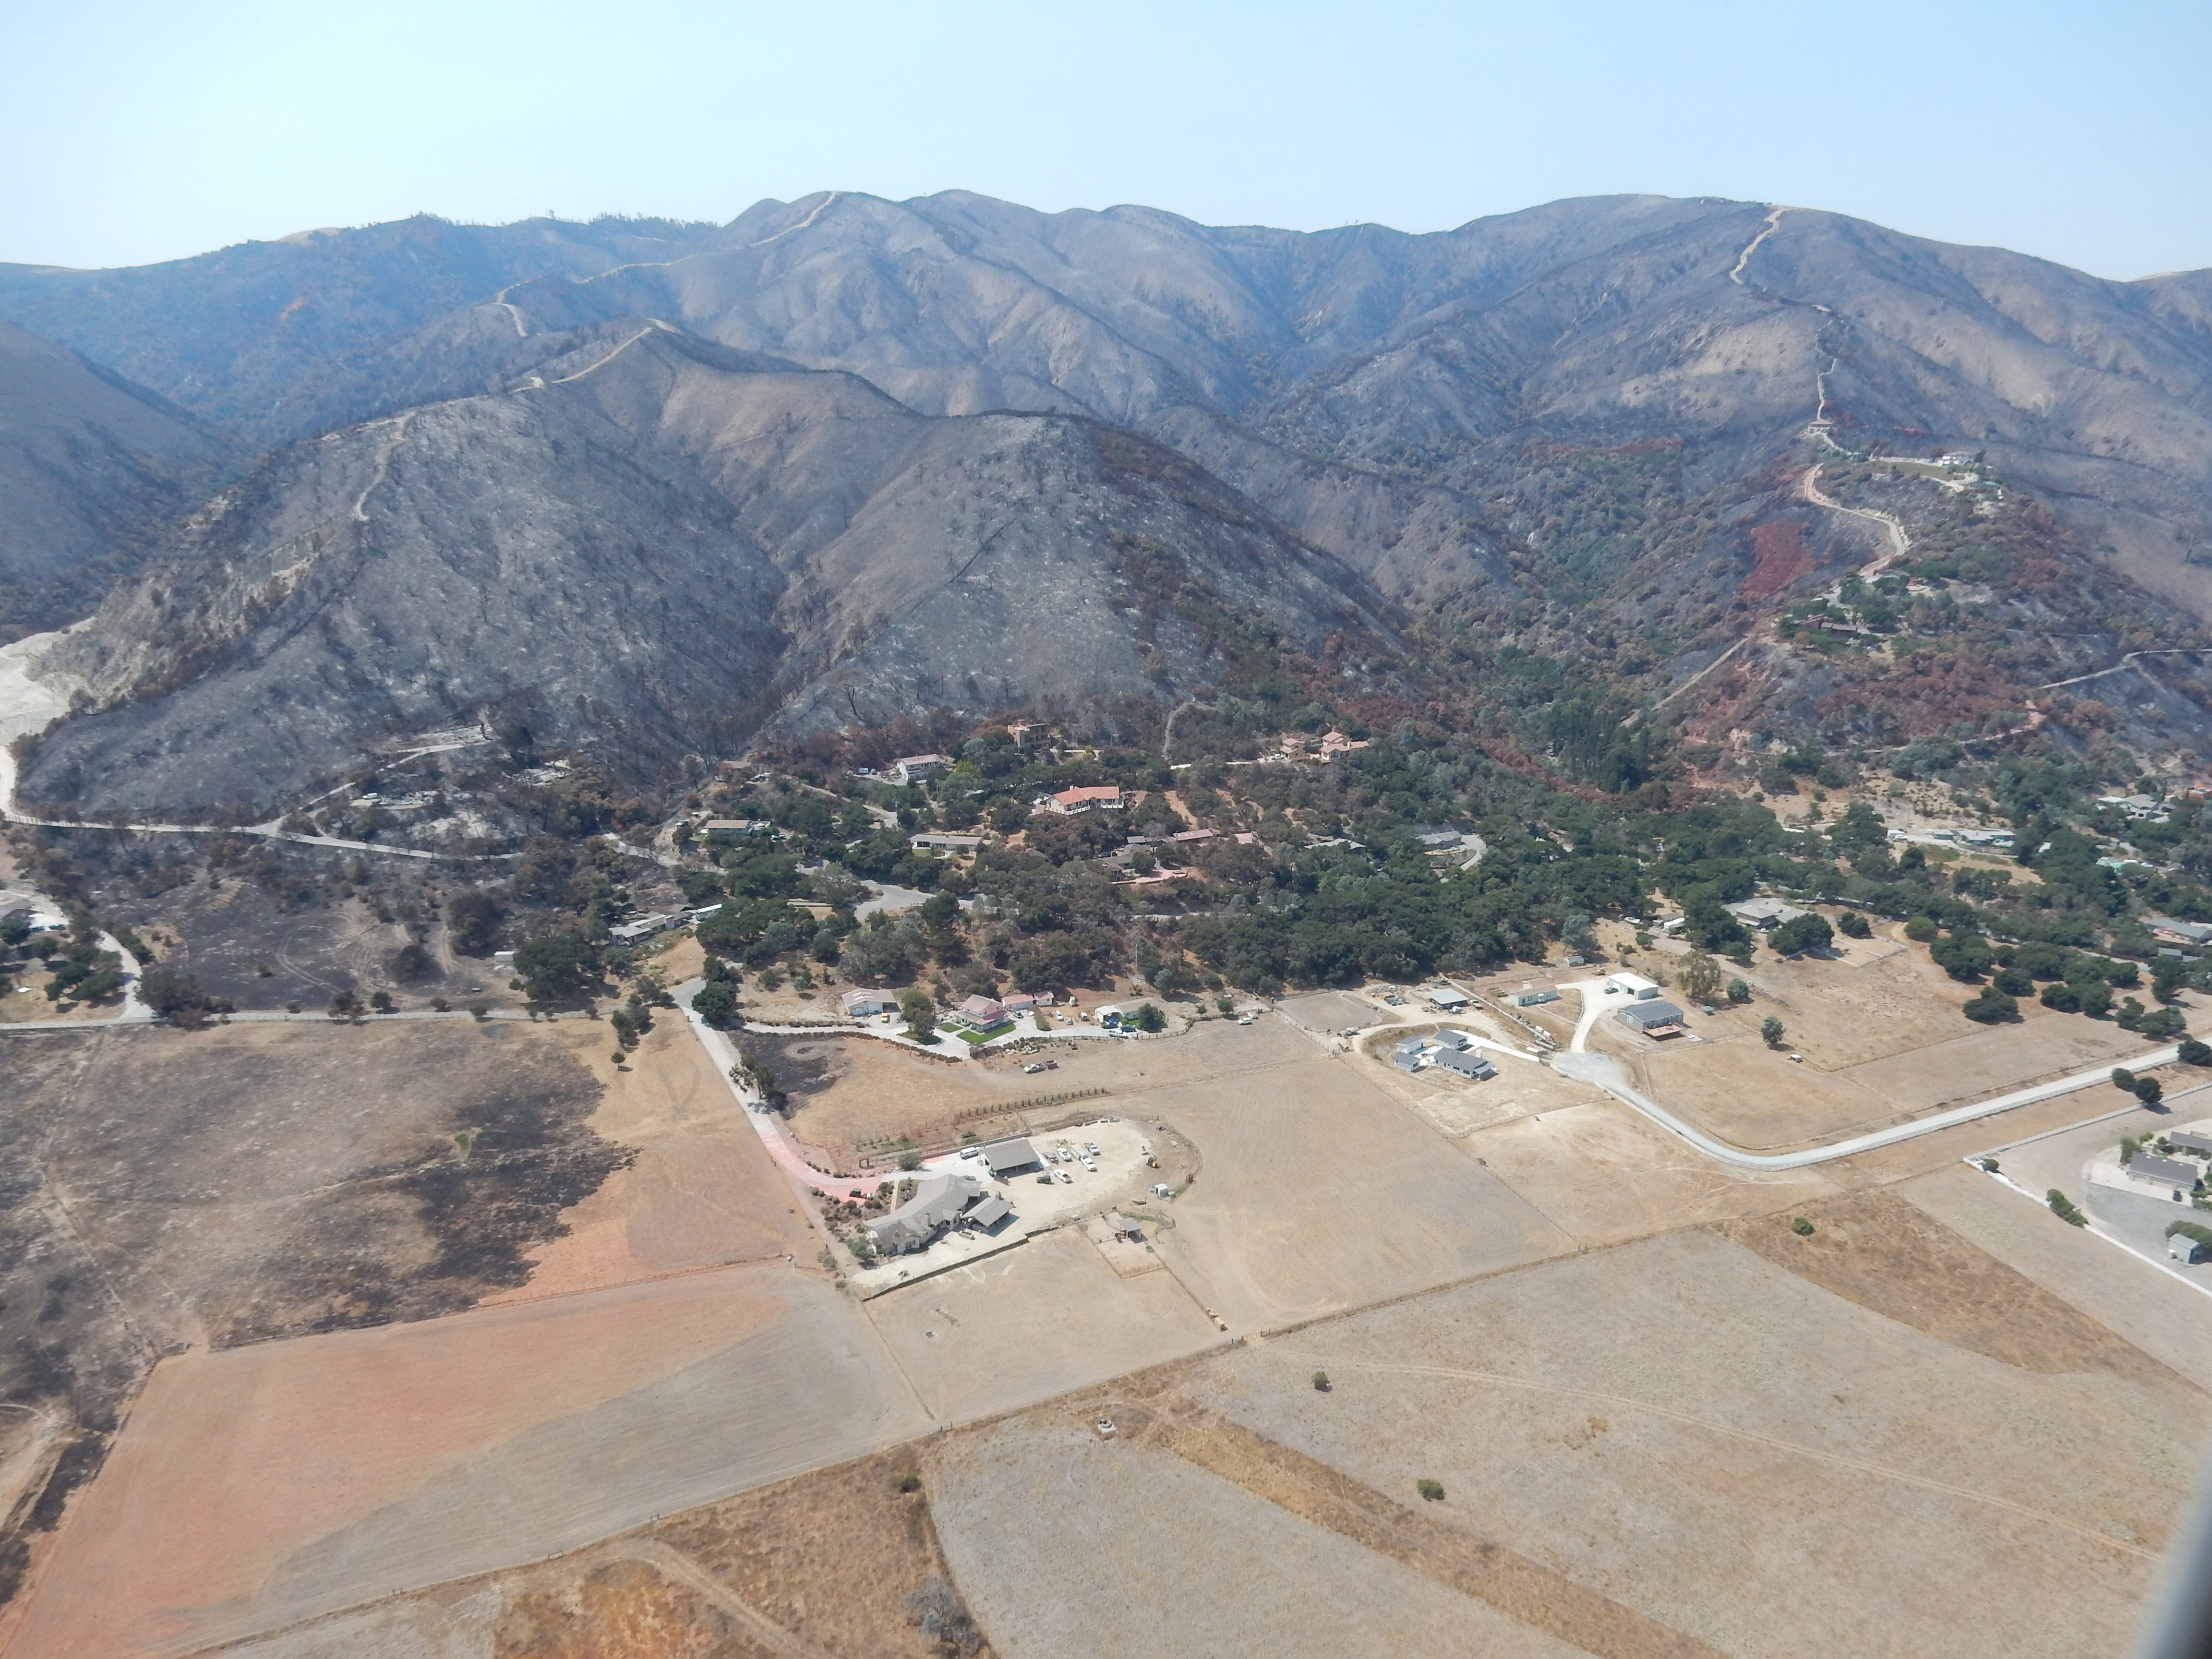 Mountains denuded by wildfire loom over homes on flat land below.